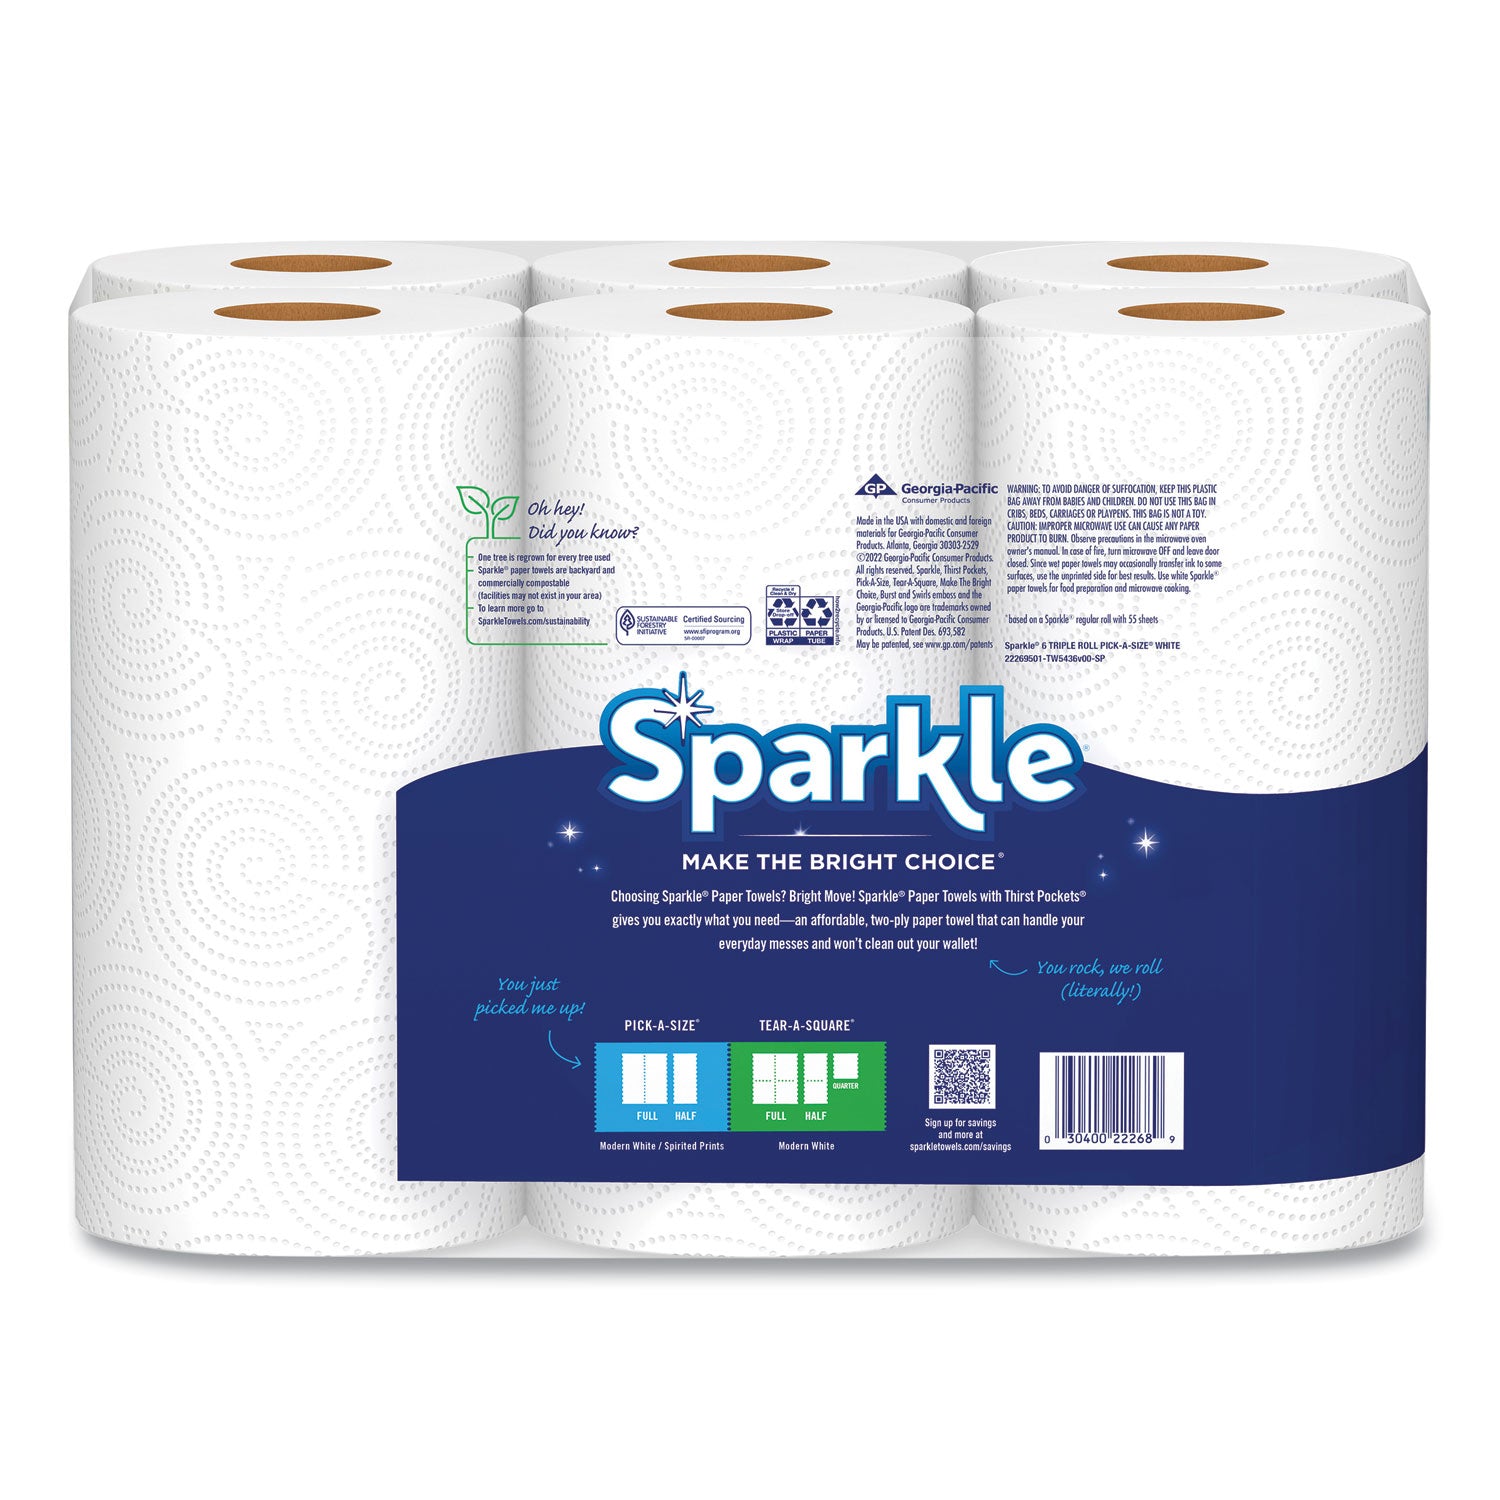 pick-a-size-perforated-kitchen-triple-roll-towels-with-thirst-pockets-2-ply-11-x-6-white-165-sheets-roll-6-rolls-pack_gpc22269501 - 3